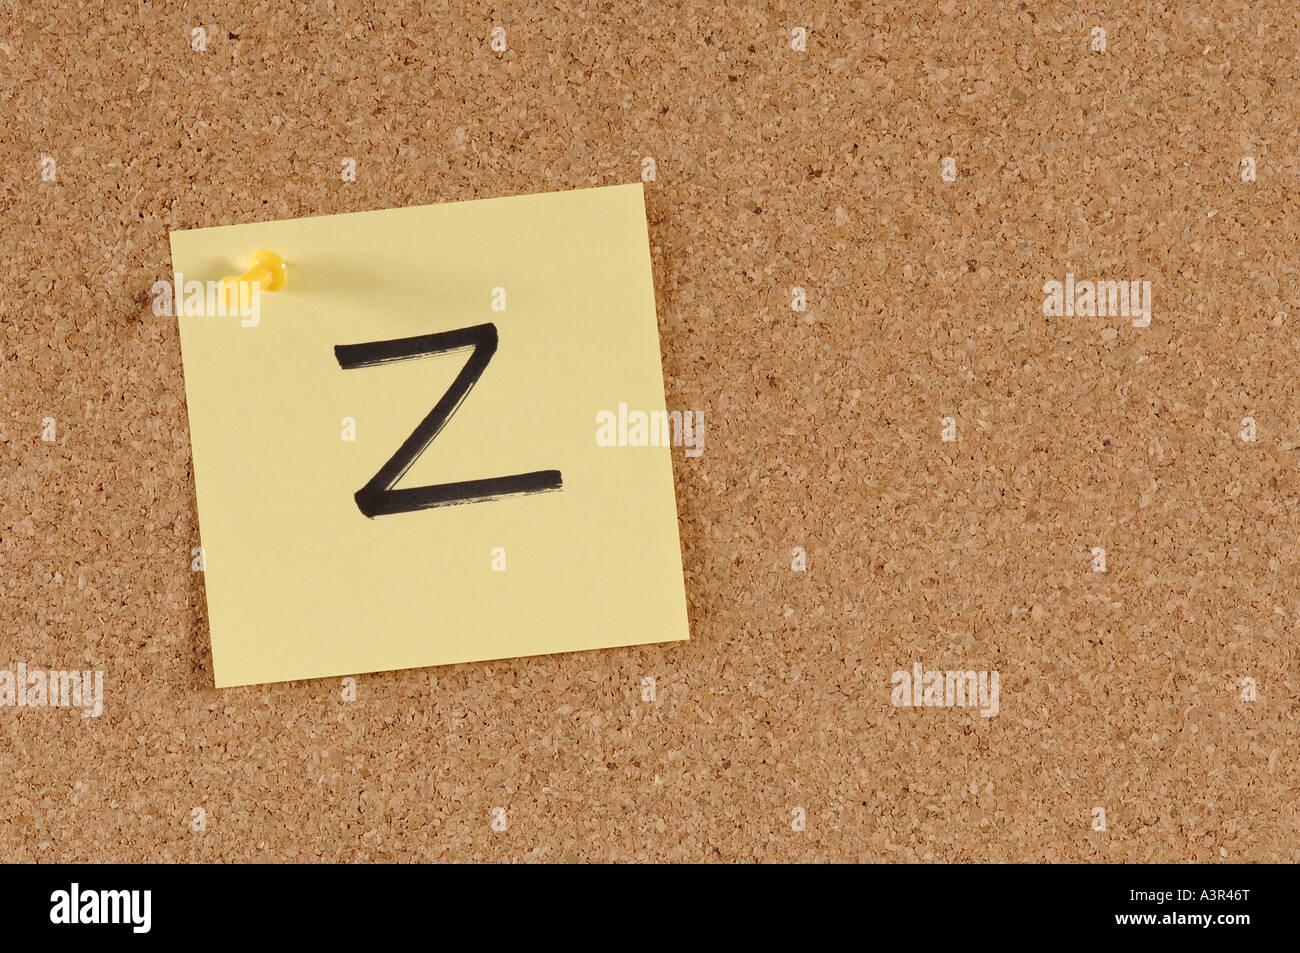 Message cork board with alphabet letters Stock Photo